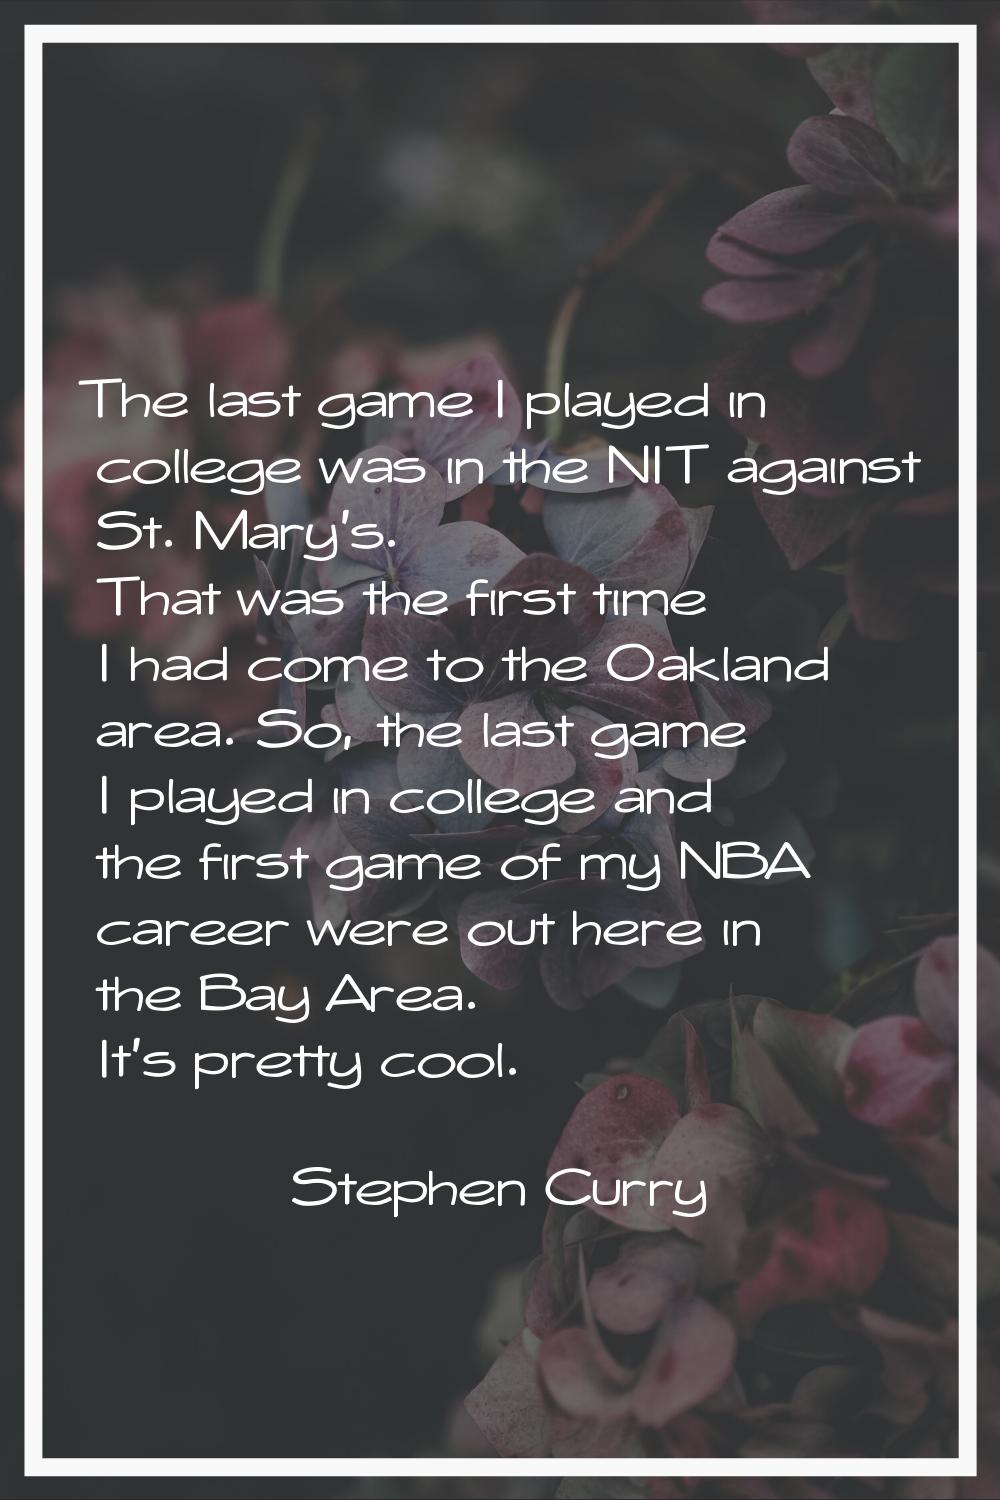 The last game I played in college was in the NIT against St. Mary's. That was the first time I had 